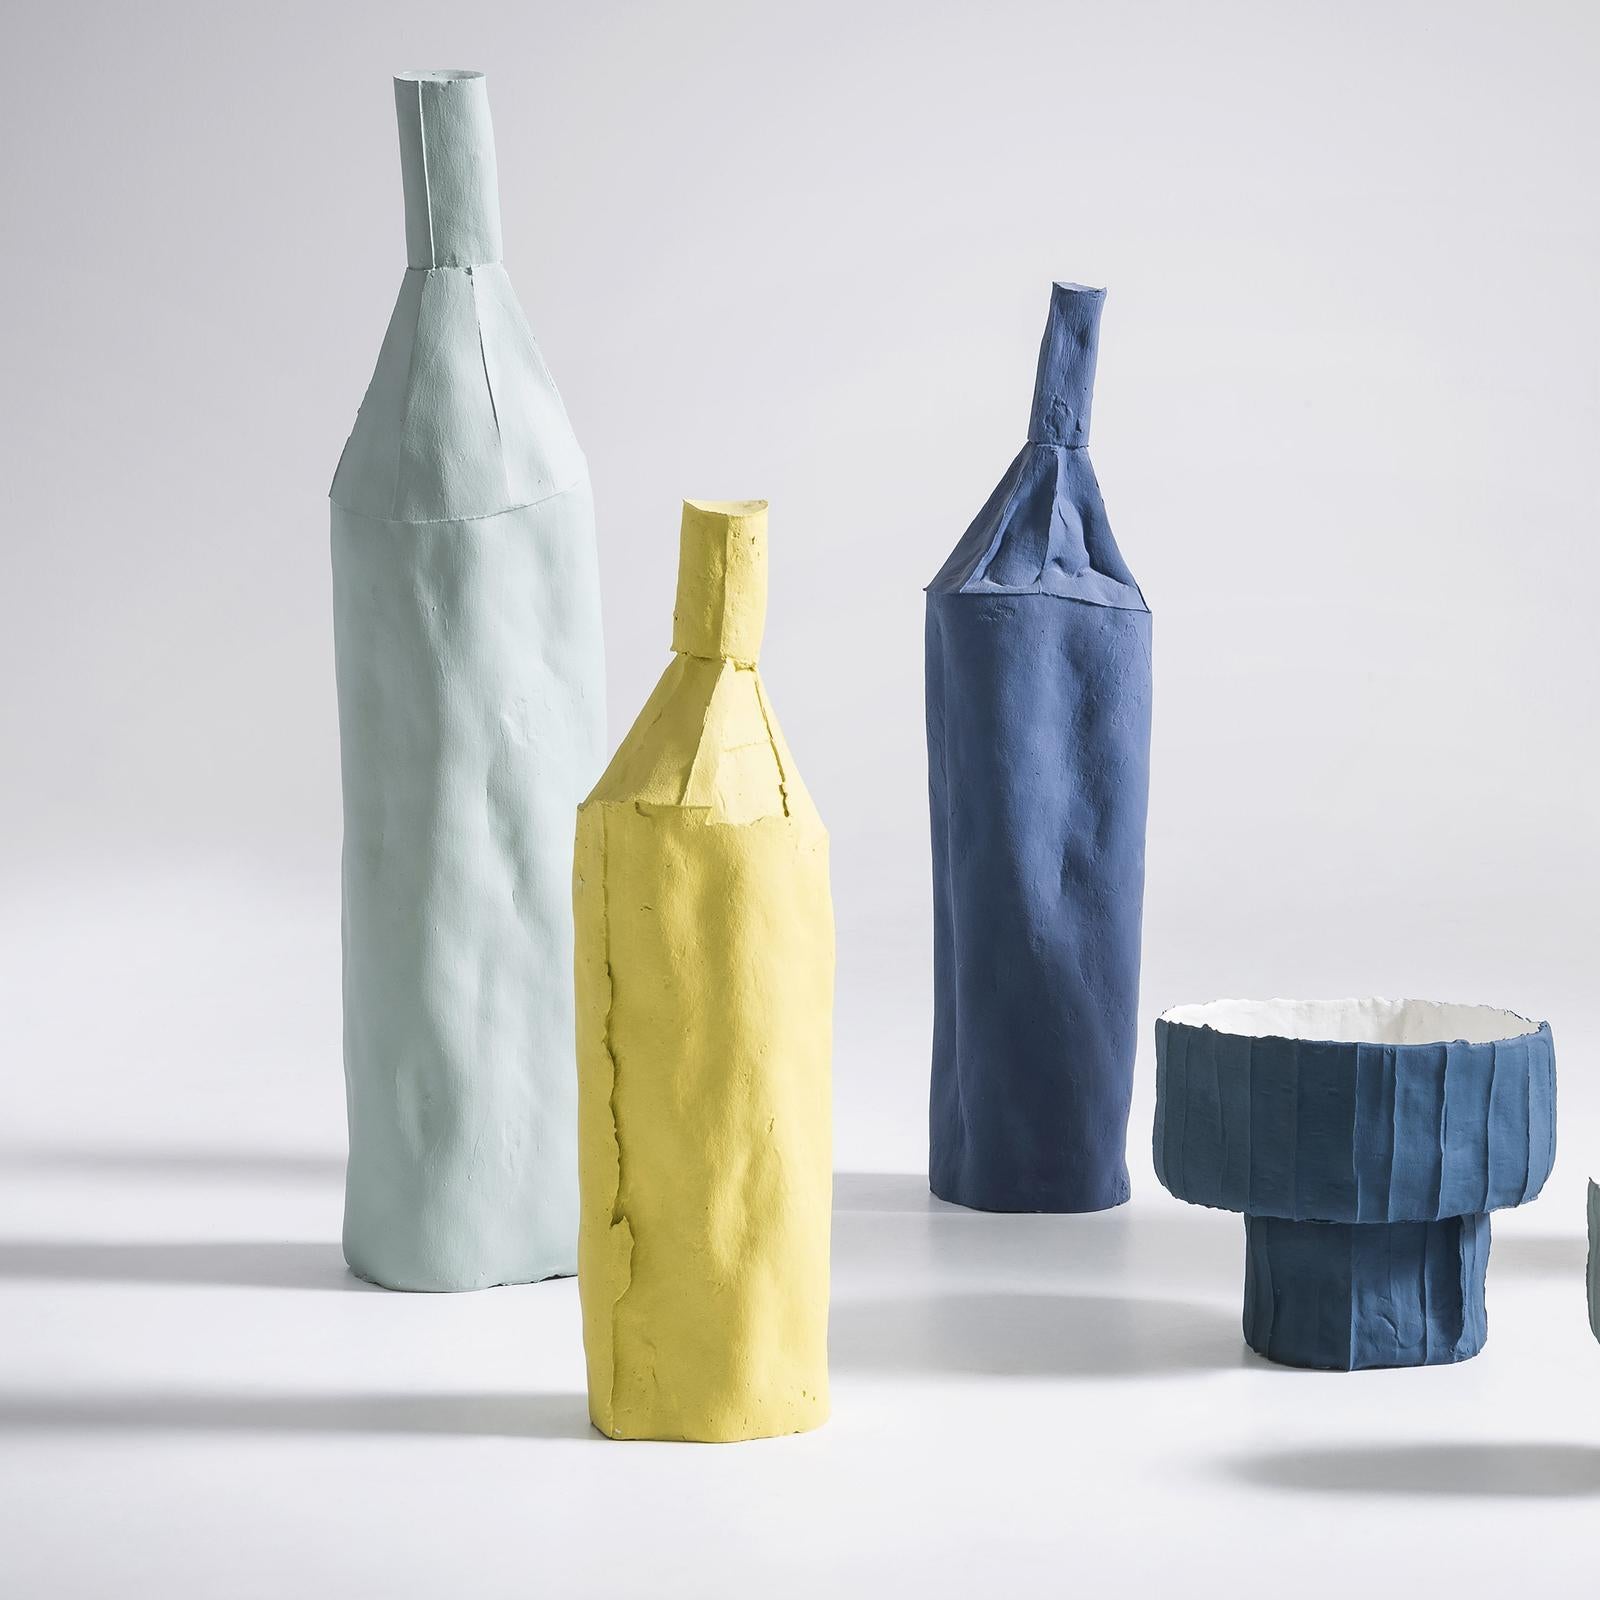 Merging tradition with innovation, this handcrafted sculpture will be a sophisticated accent on any table with its captivating and unique allure. Its bottle-shaped silhouette has an elegant royal blue matte finish that enhances its minimal design